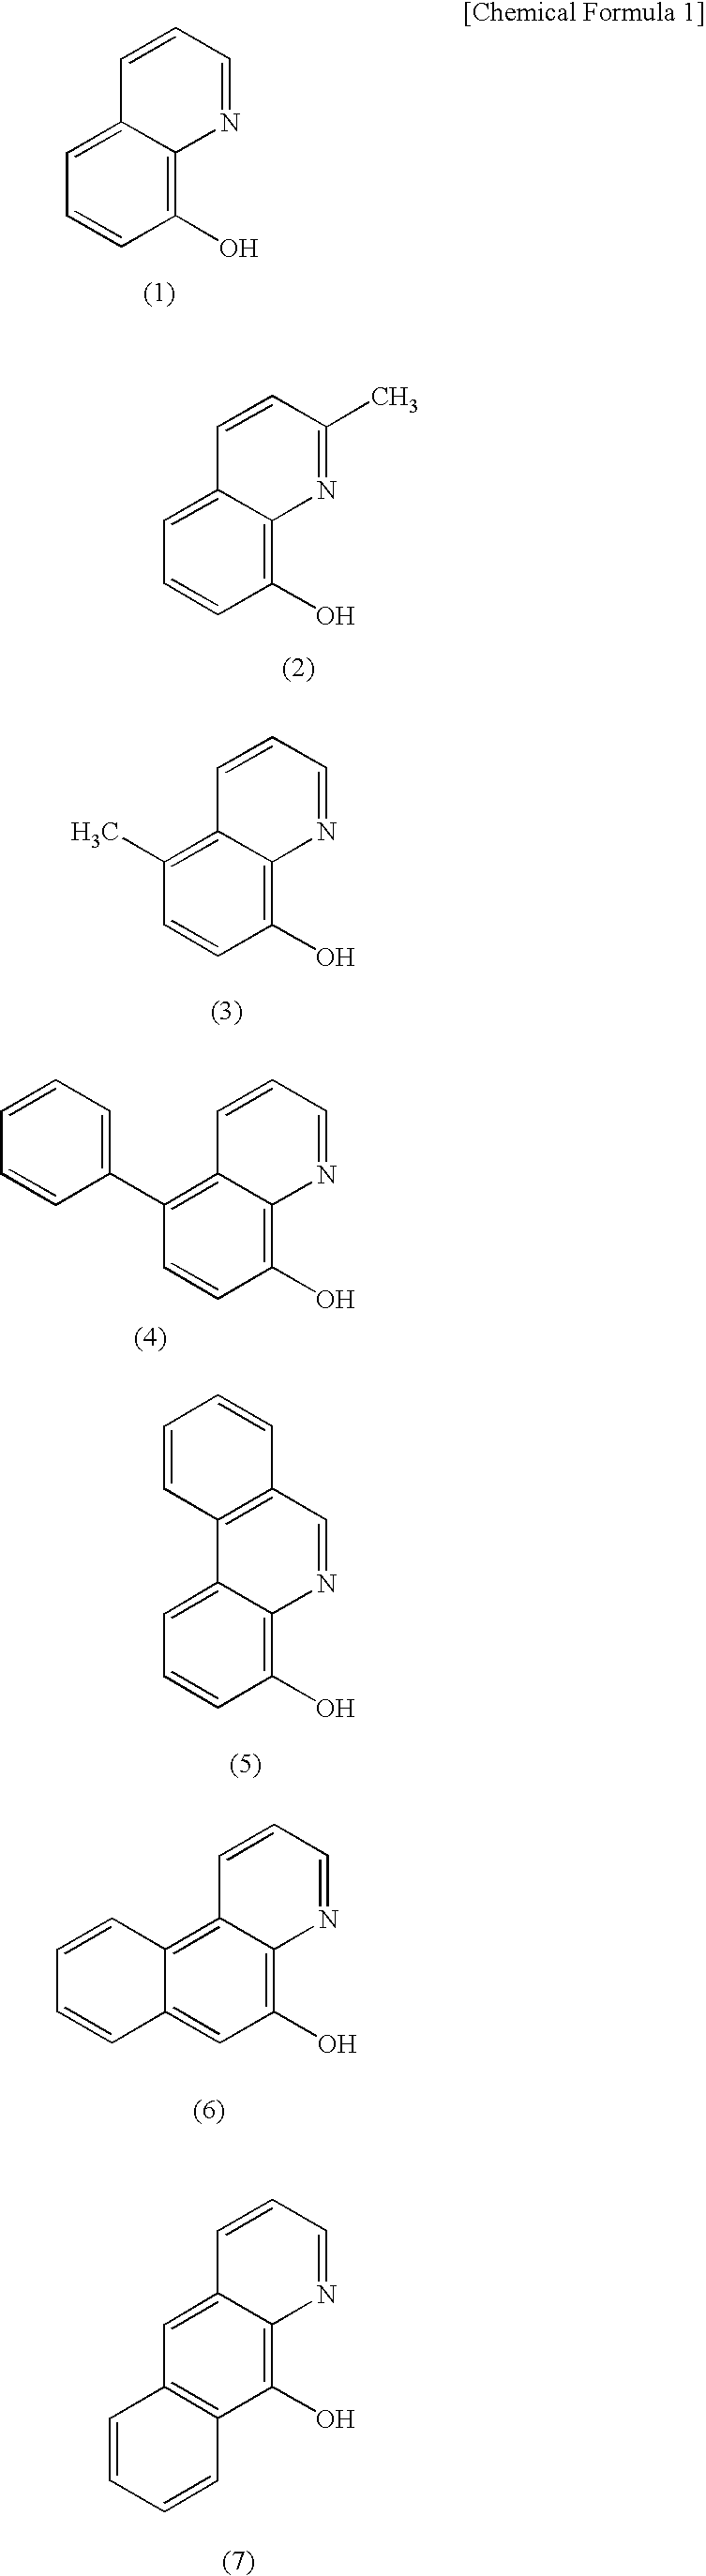 Organic-inorganic hybrid material, composition for synthesizing the same, and manufacturing method of the same